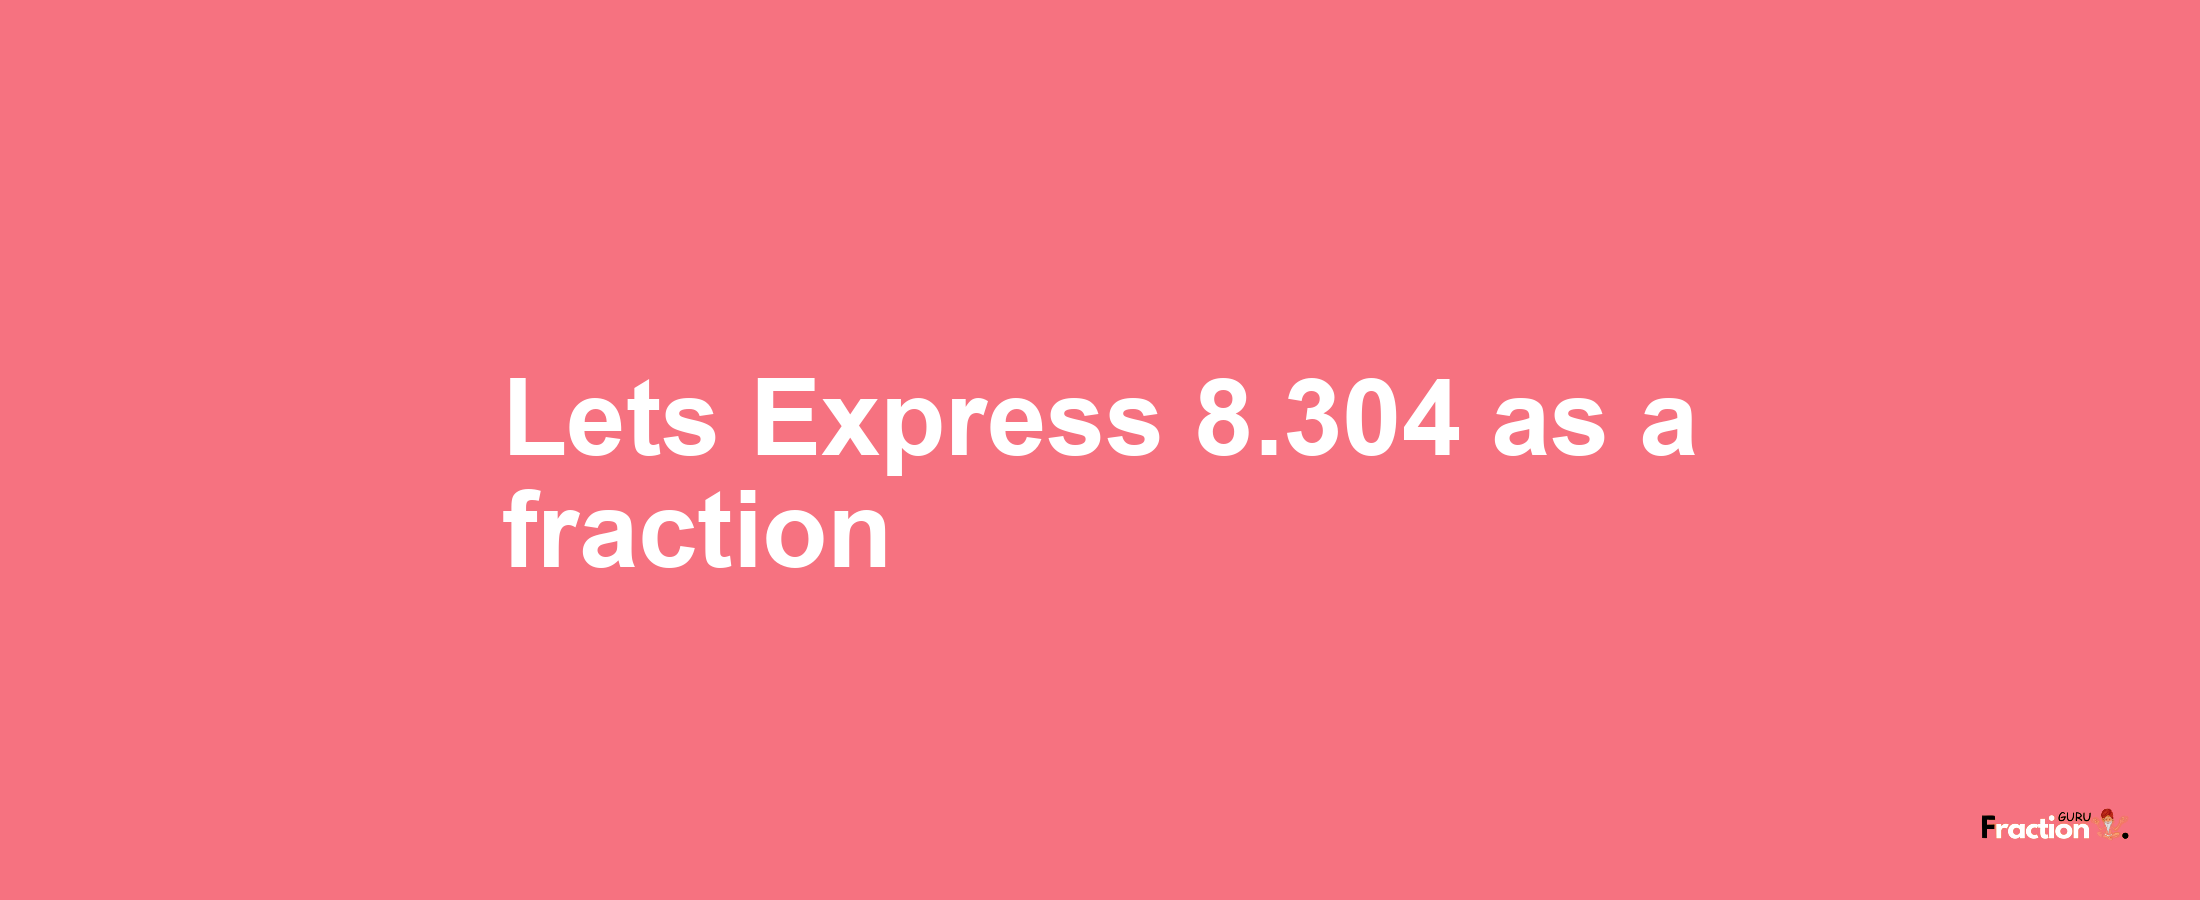 Lets Express 8.304 as afraction